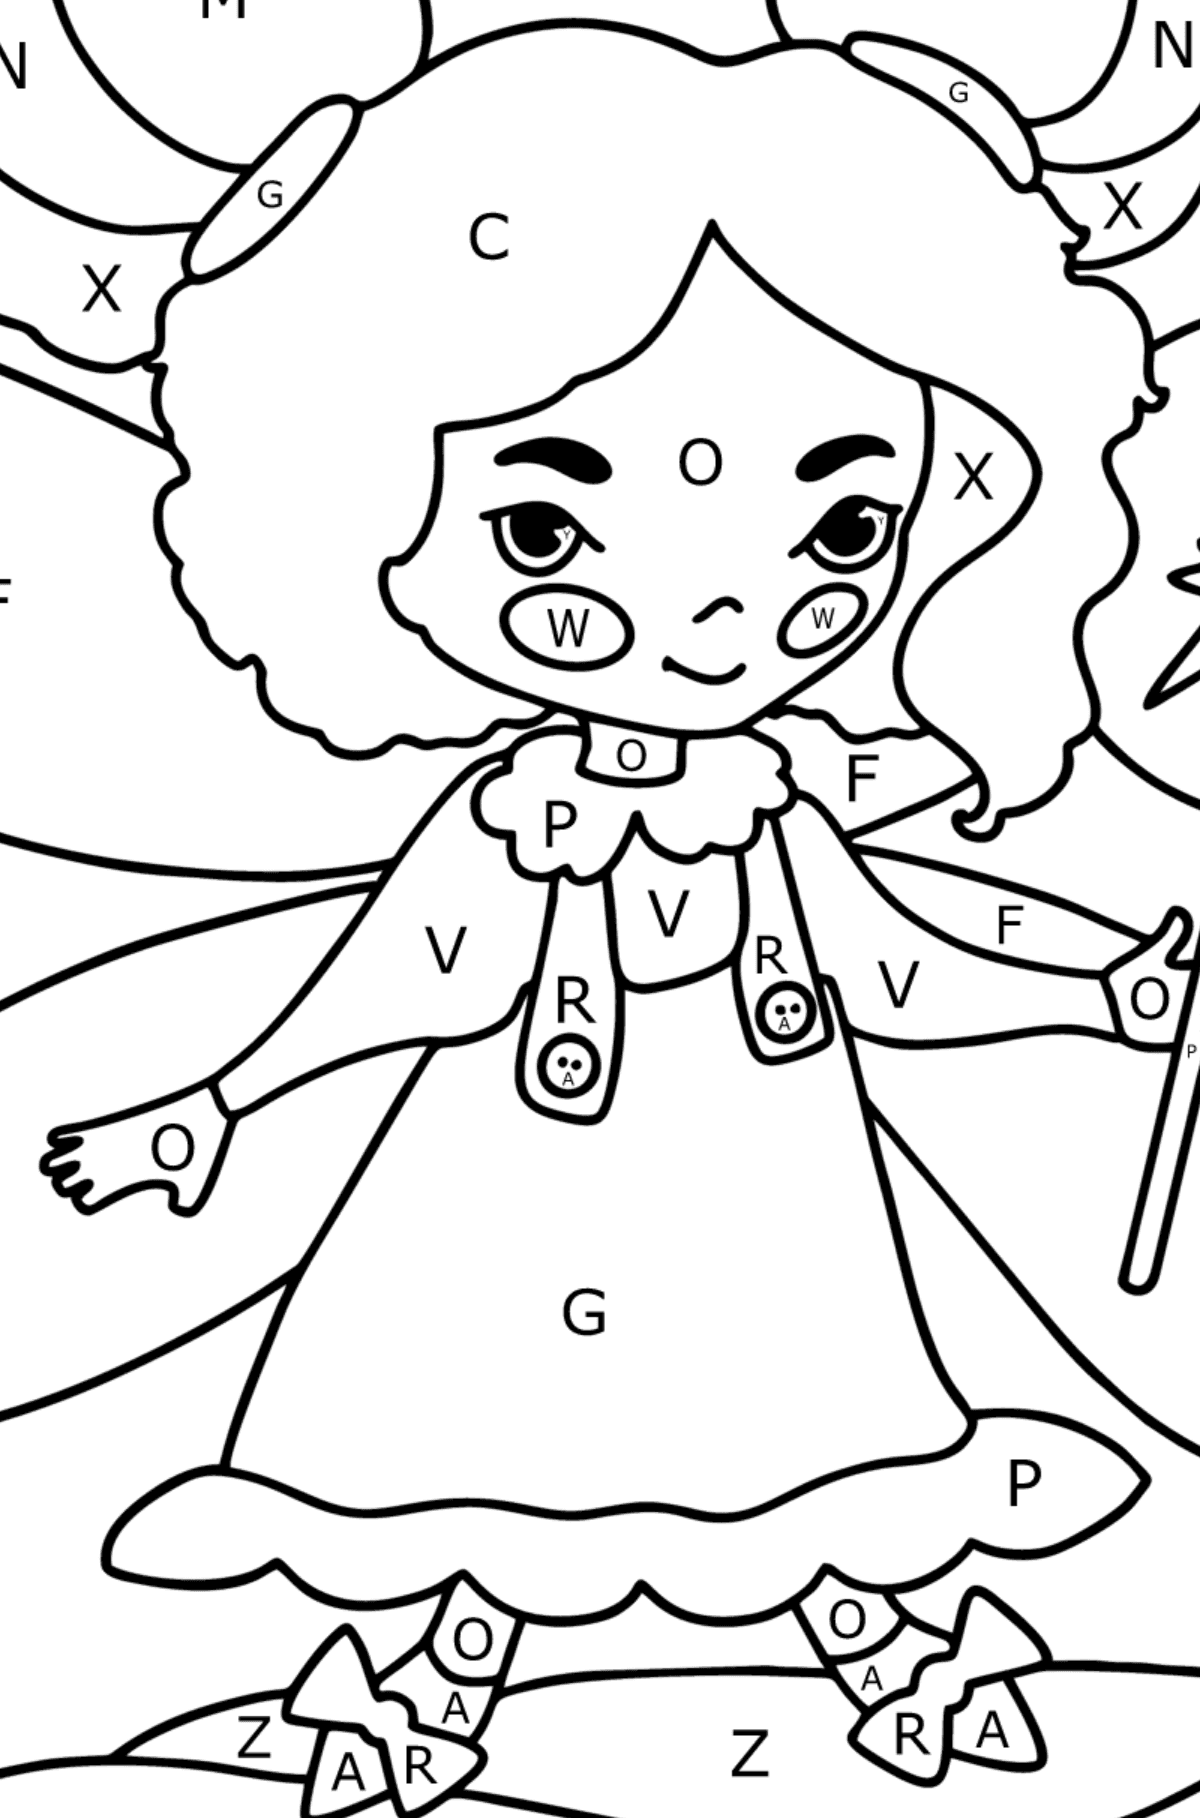 Fairy with a magic wand coloring page - Coloring by Letters for Kids